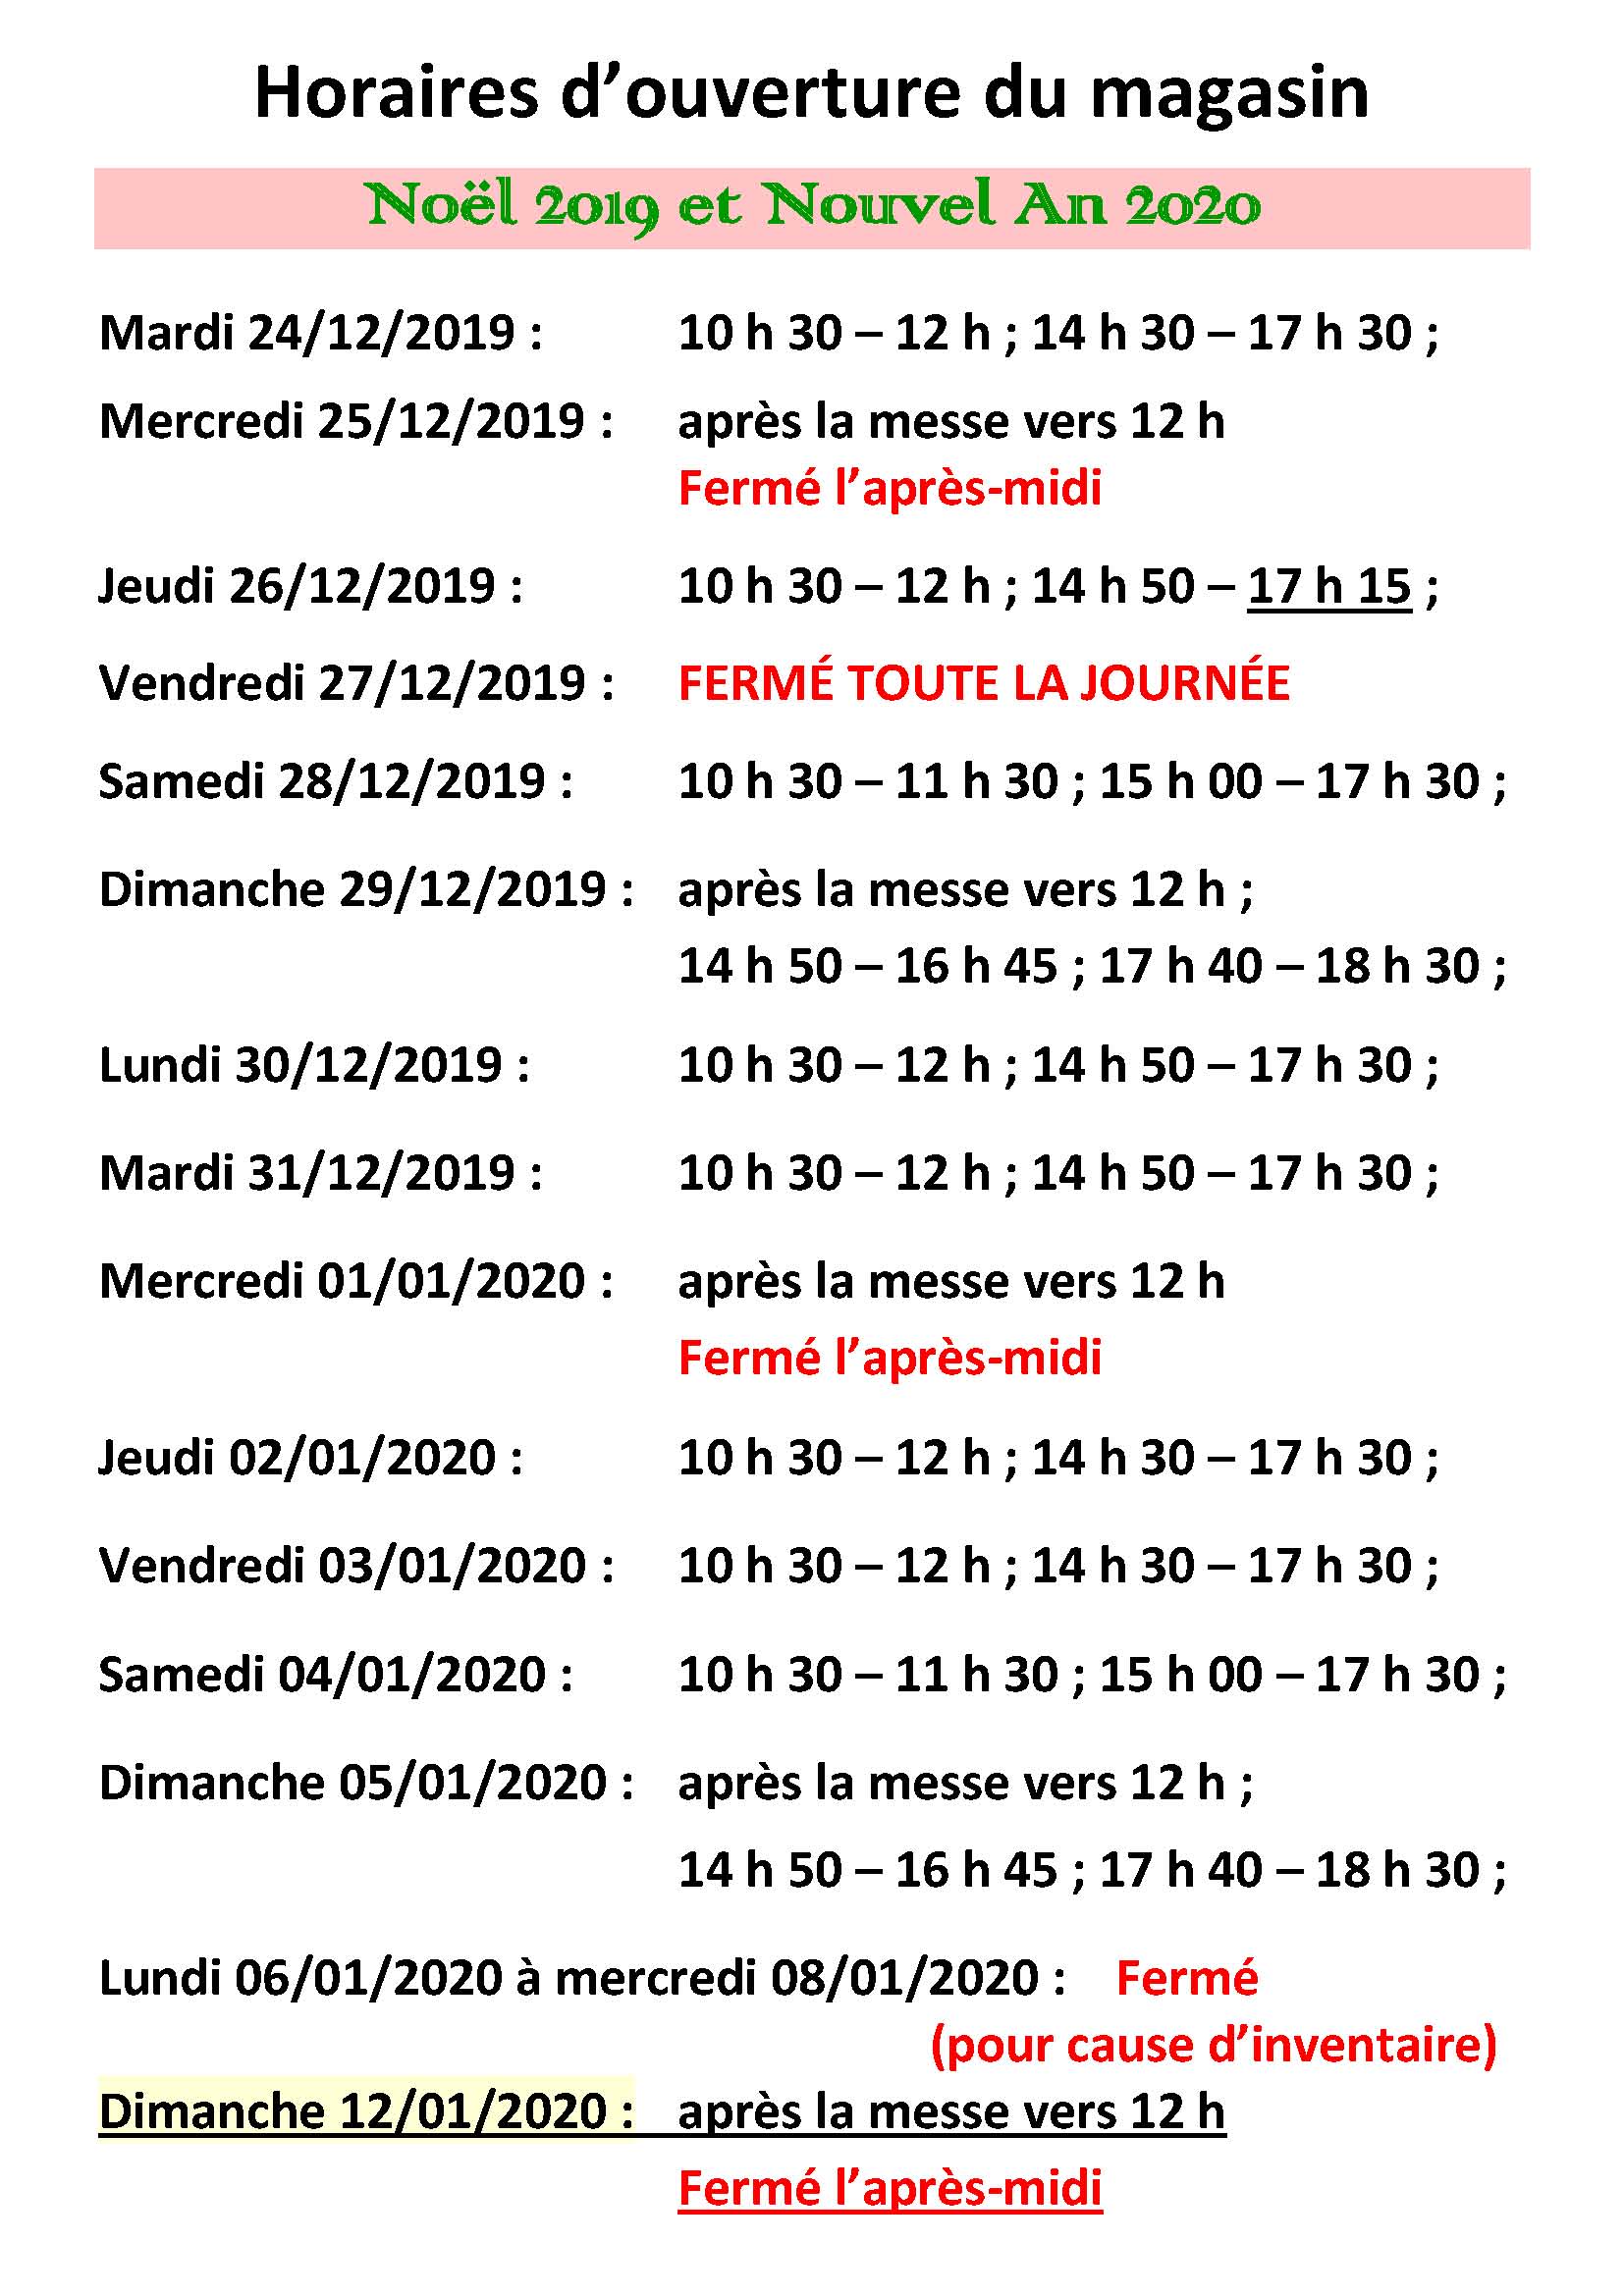 Horaires mag Noël Page 1